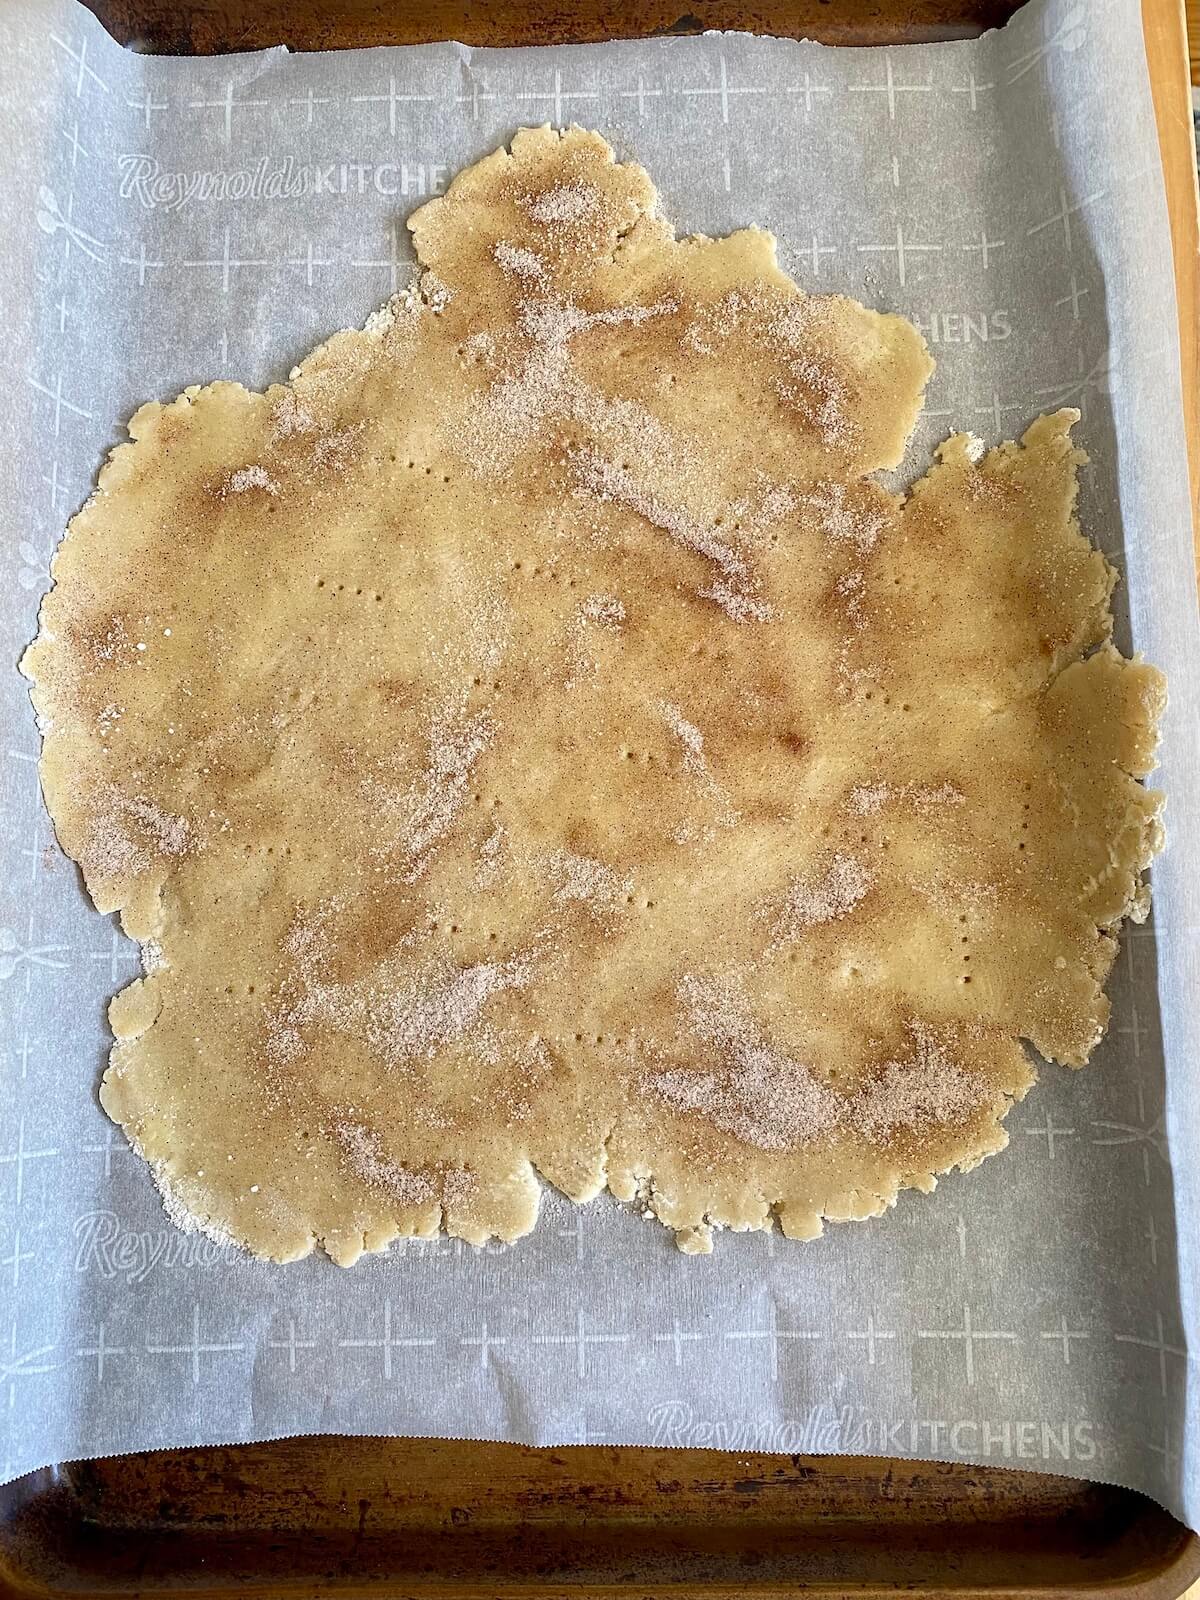 A rolled out pie dough on a sheet of parchment paper on a baking sheet. There is cinnamon and sugar sprinkled liberally on the pie dough.